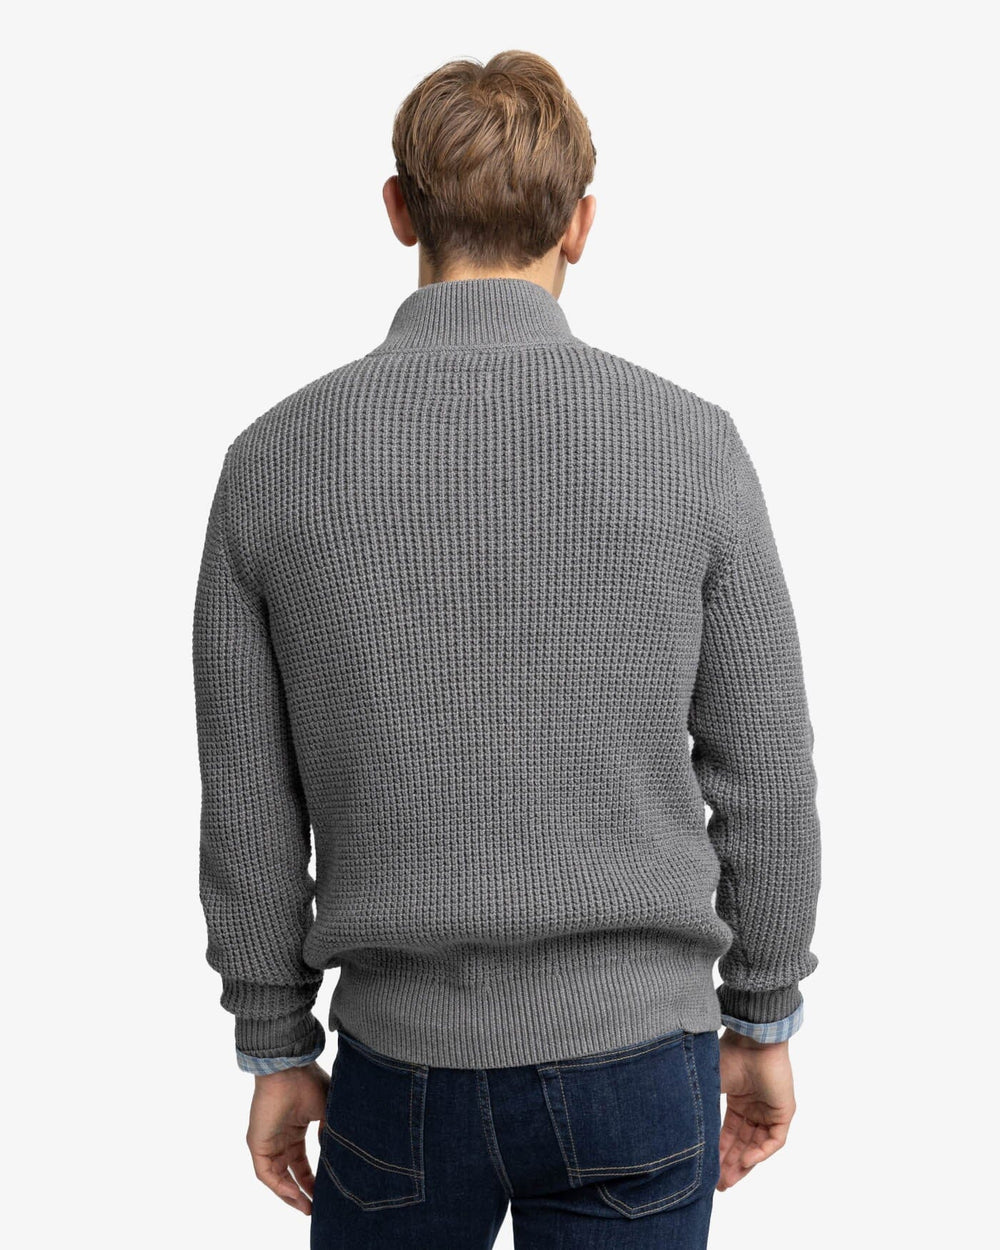 The back view of the Southern Tide Westmont Heather Jade Quarter Zip Button by Southern Tide - Heather Shadow Grey